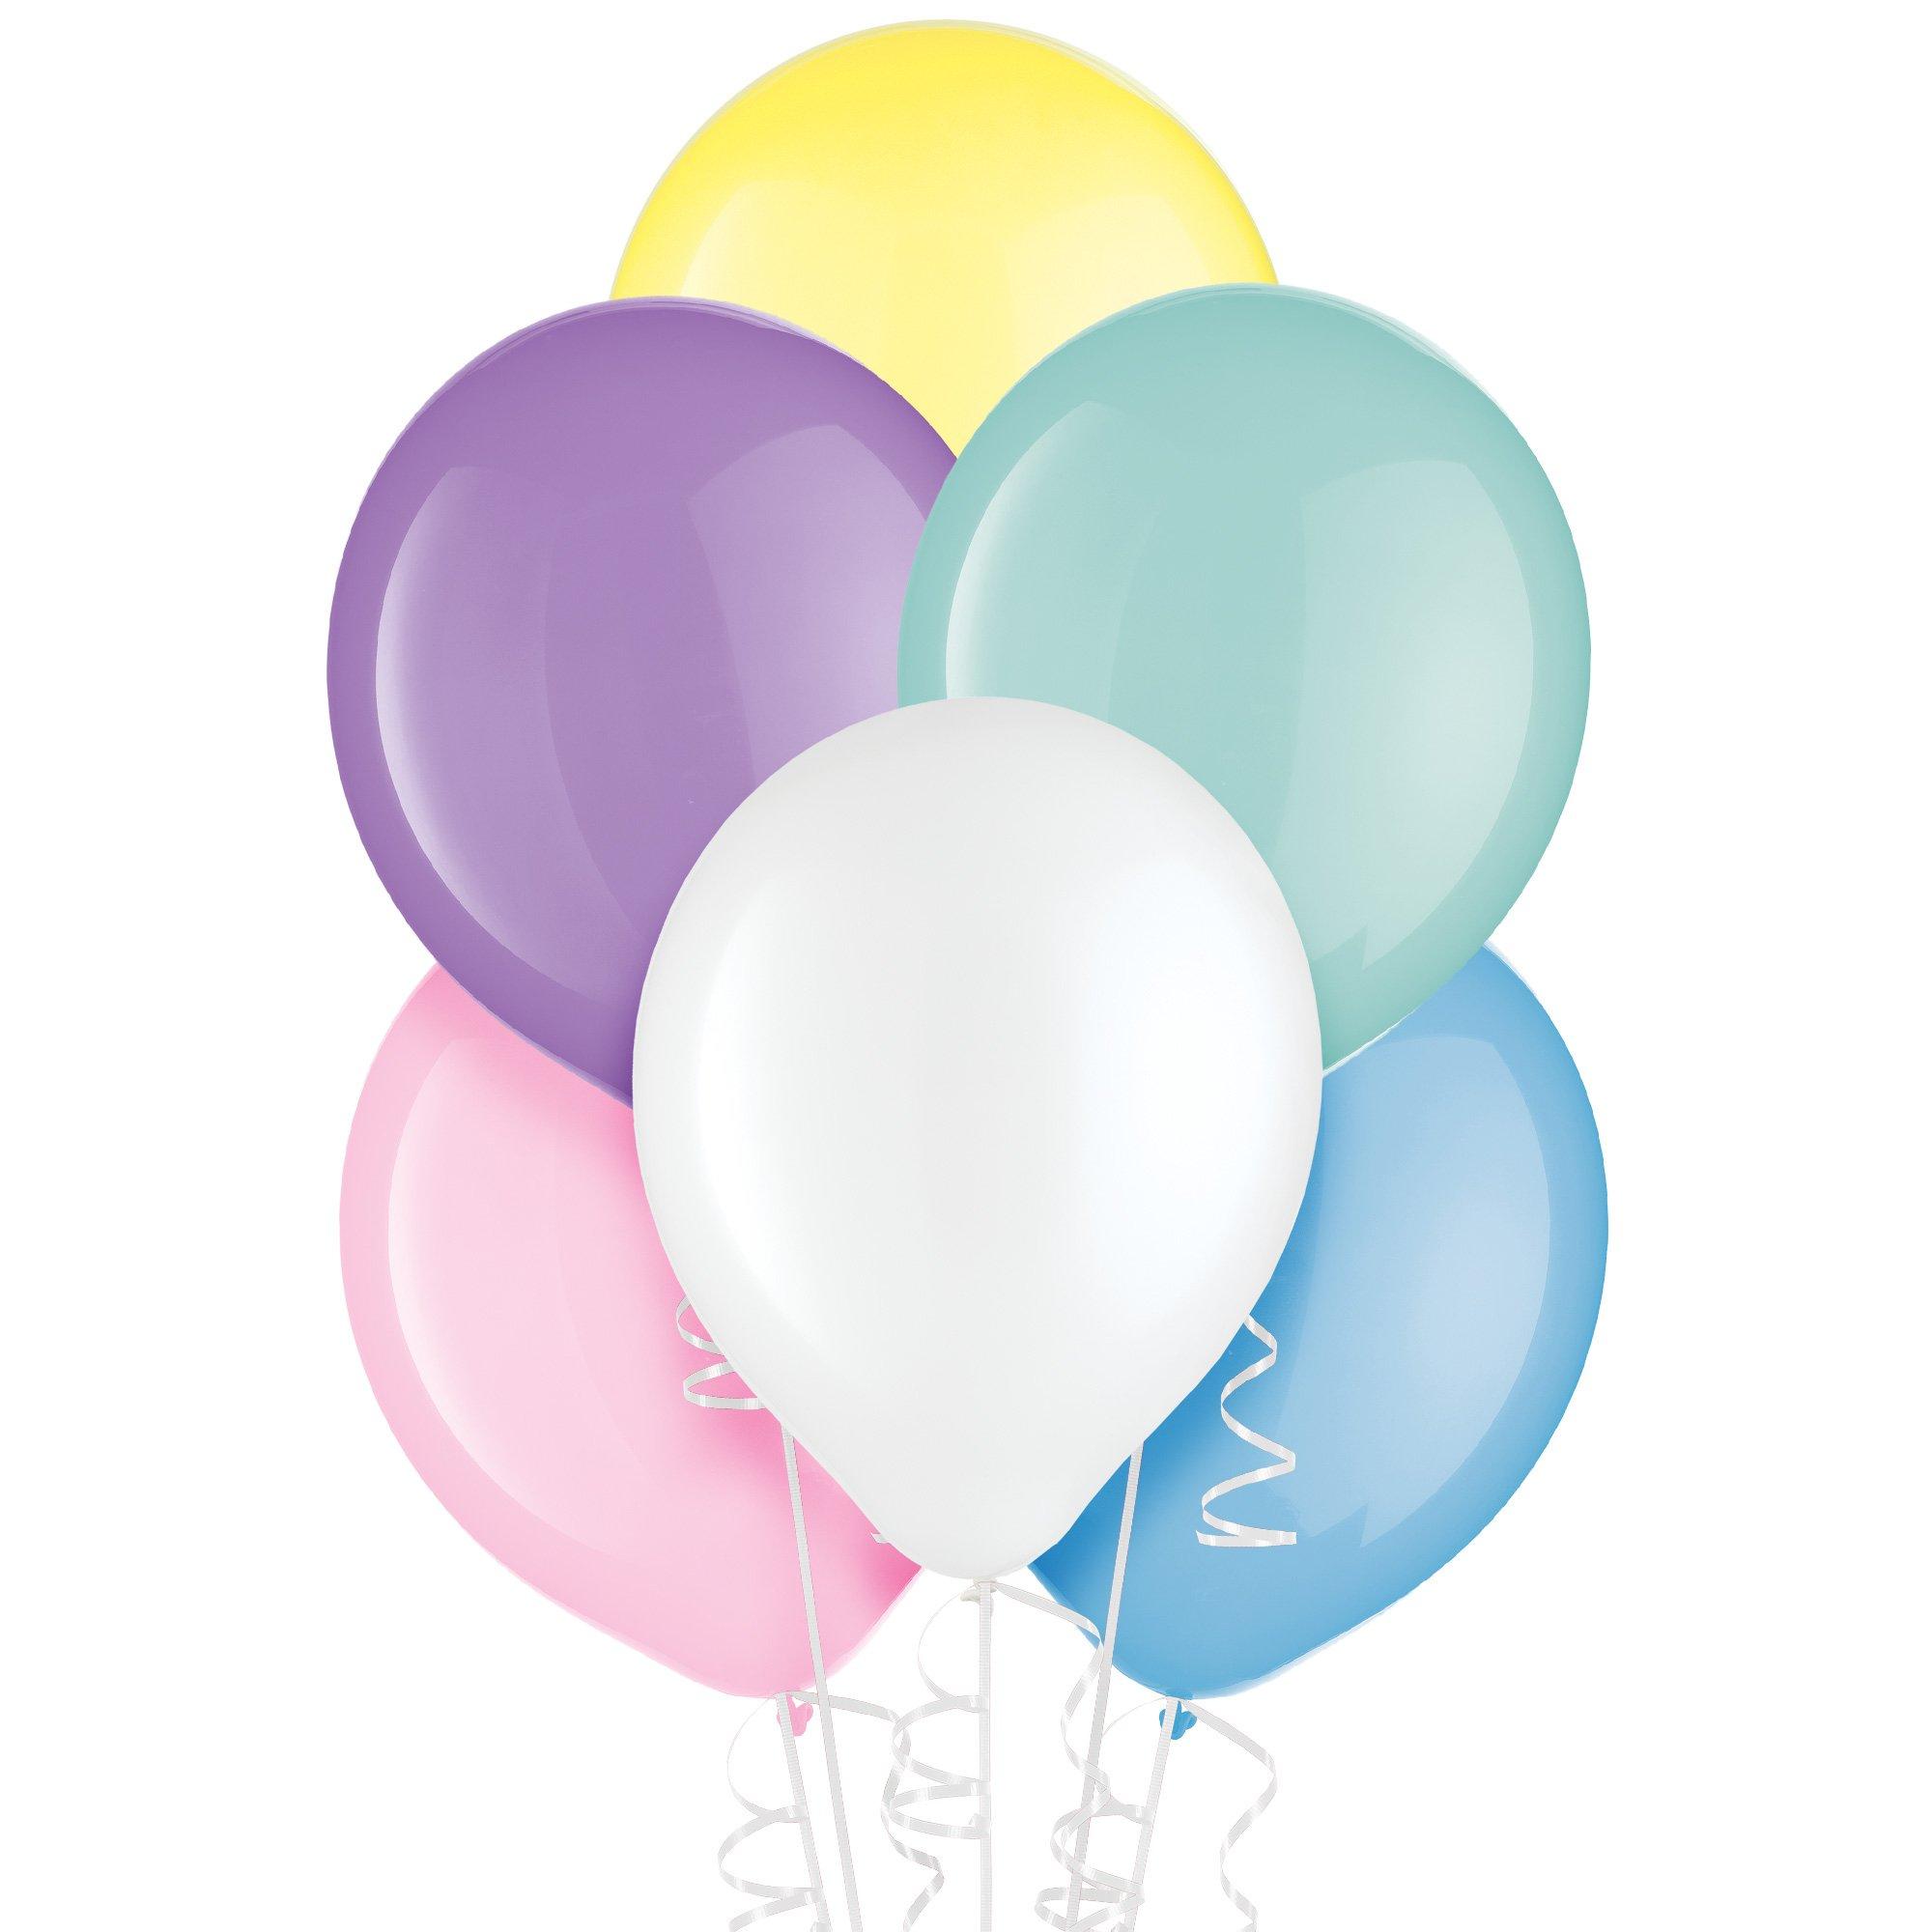 Buy Ripp Pastel Colored Balloons, Pastel Party Decorations Ballons